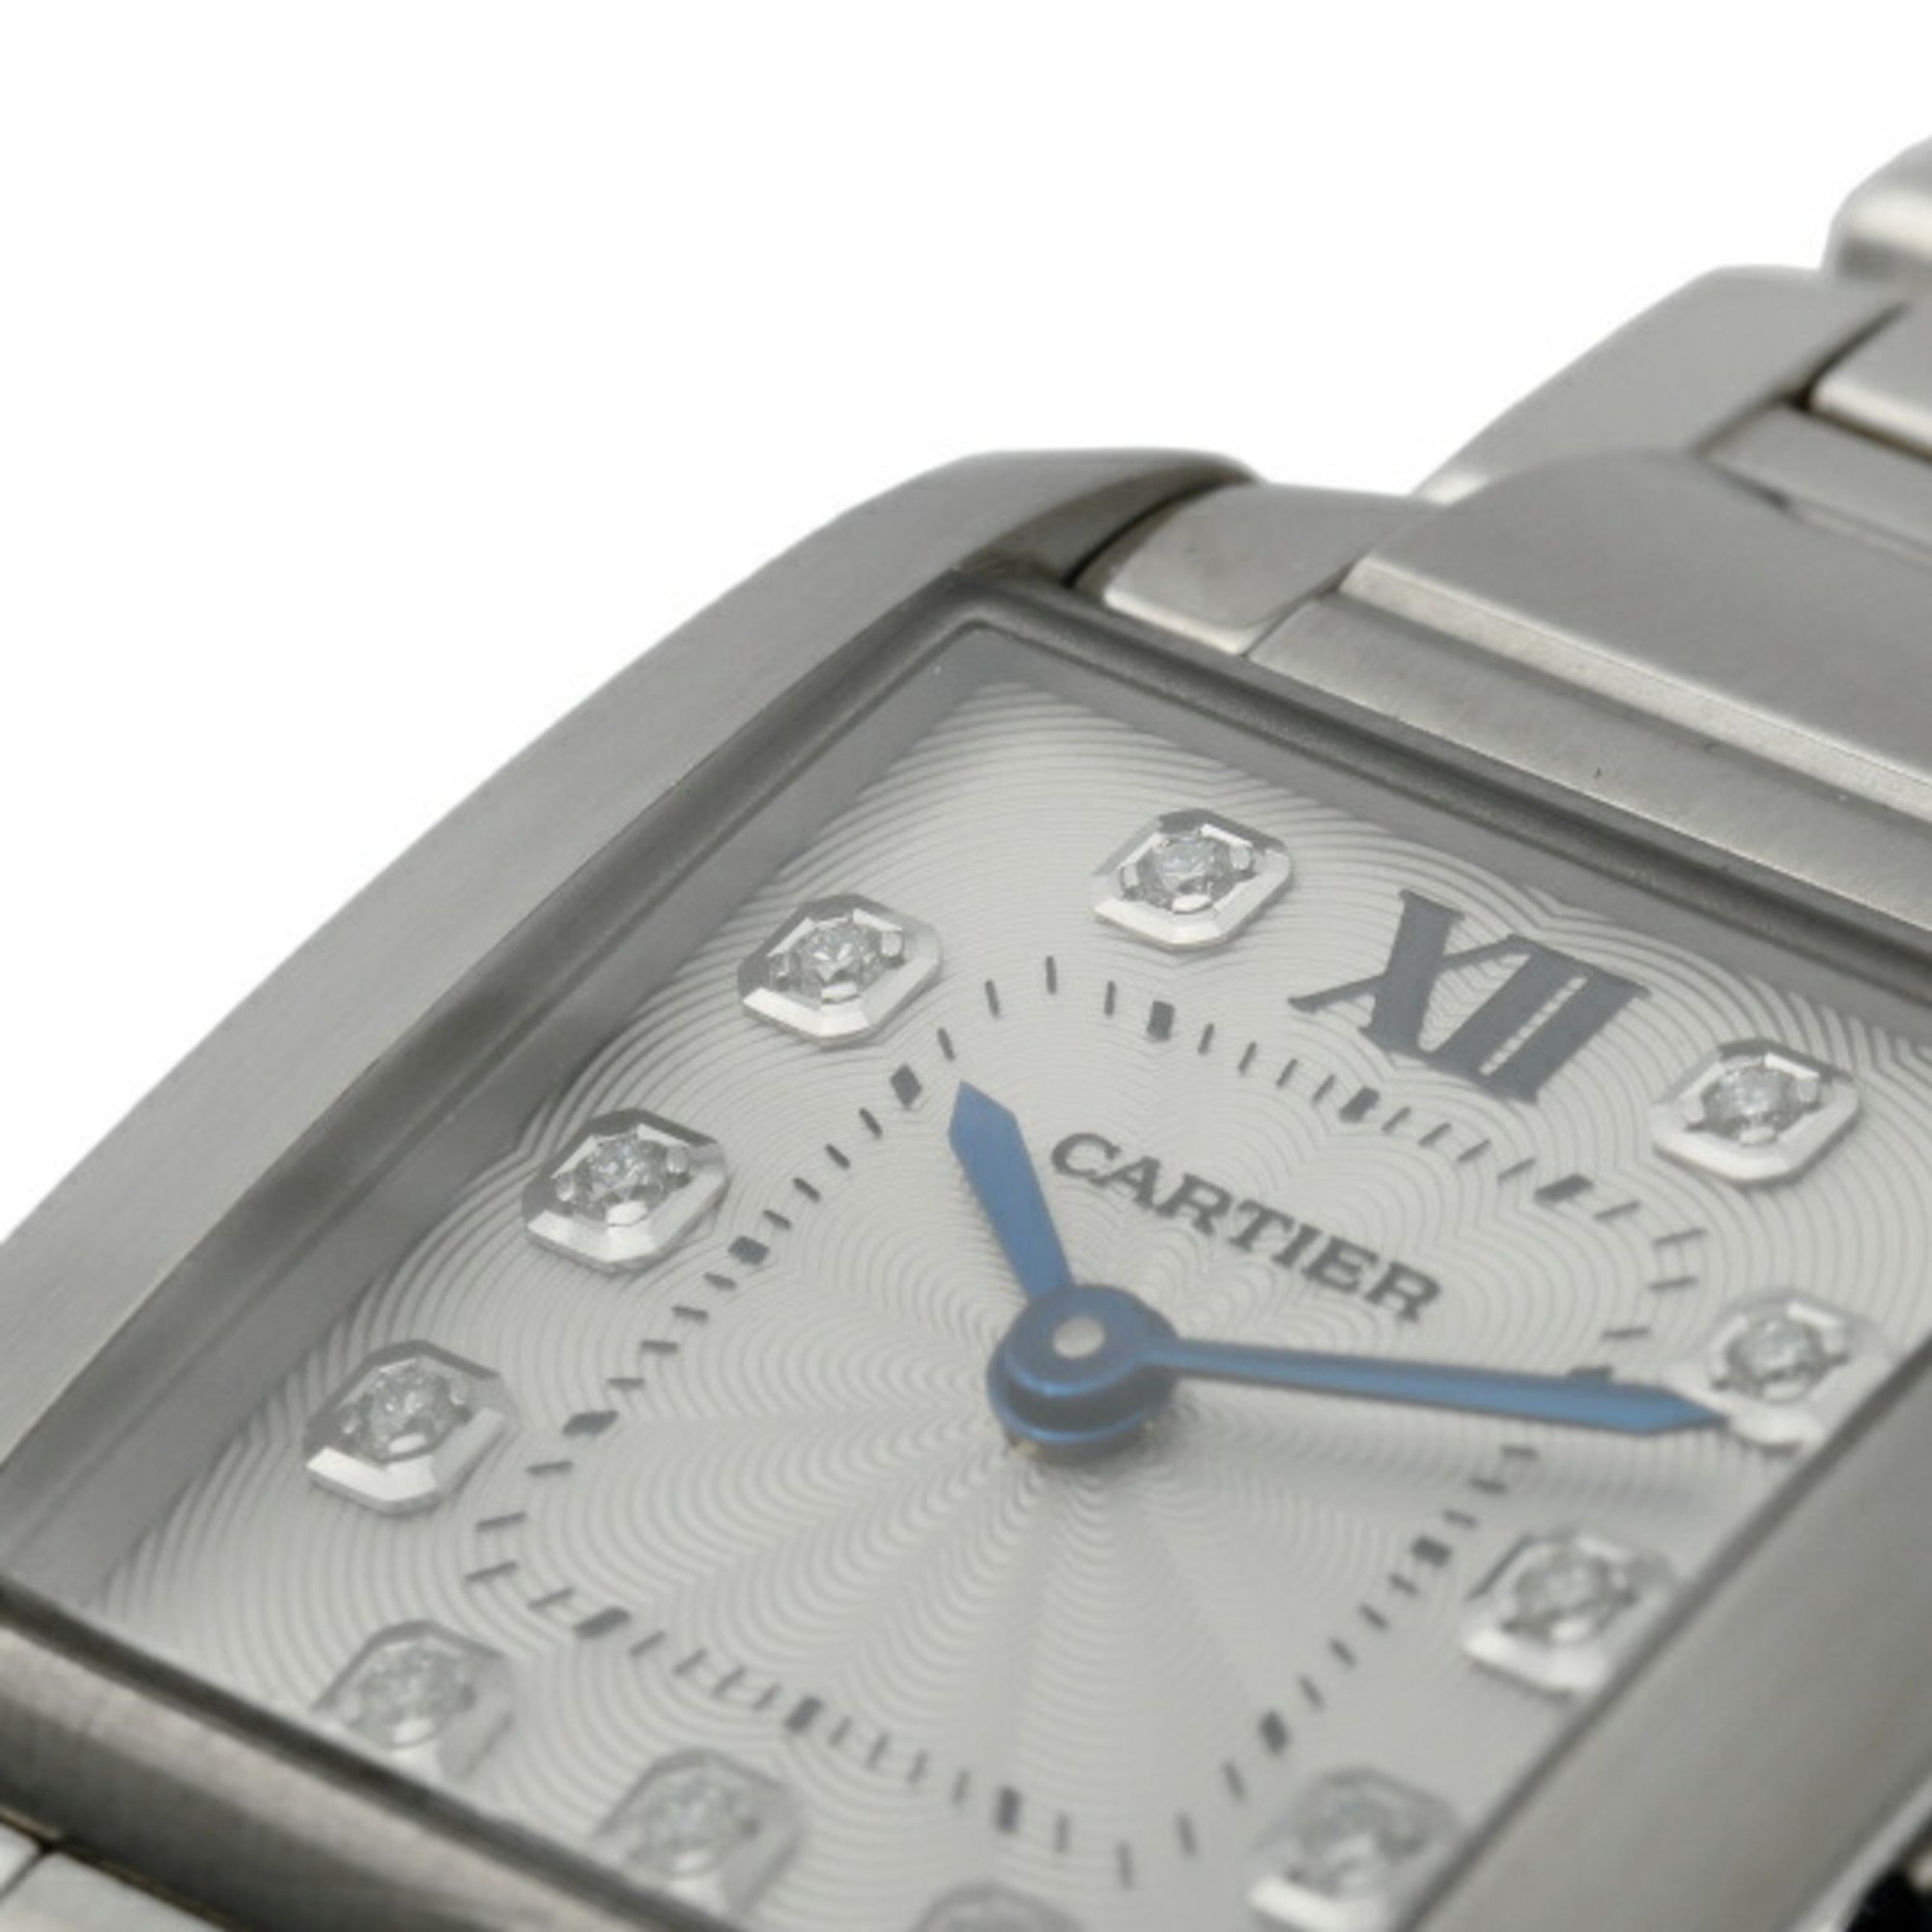 Cartier Tank Francaise SM Limited Edition WE110006 Silver Dial Ladies Watch